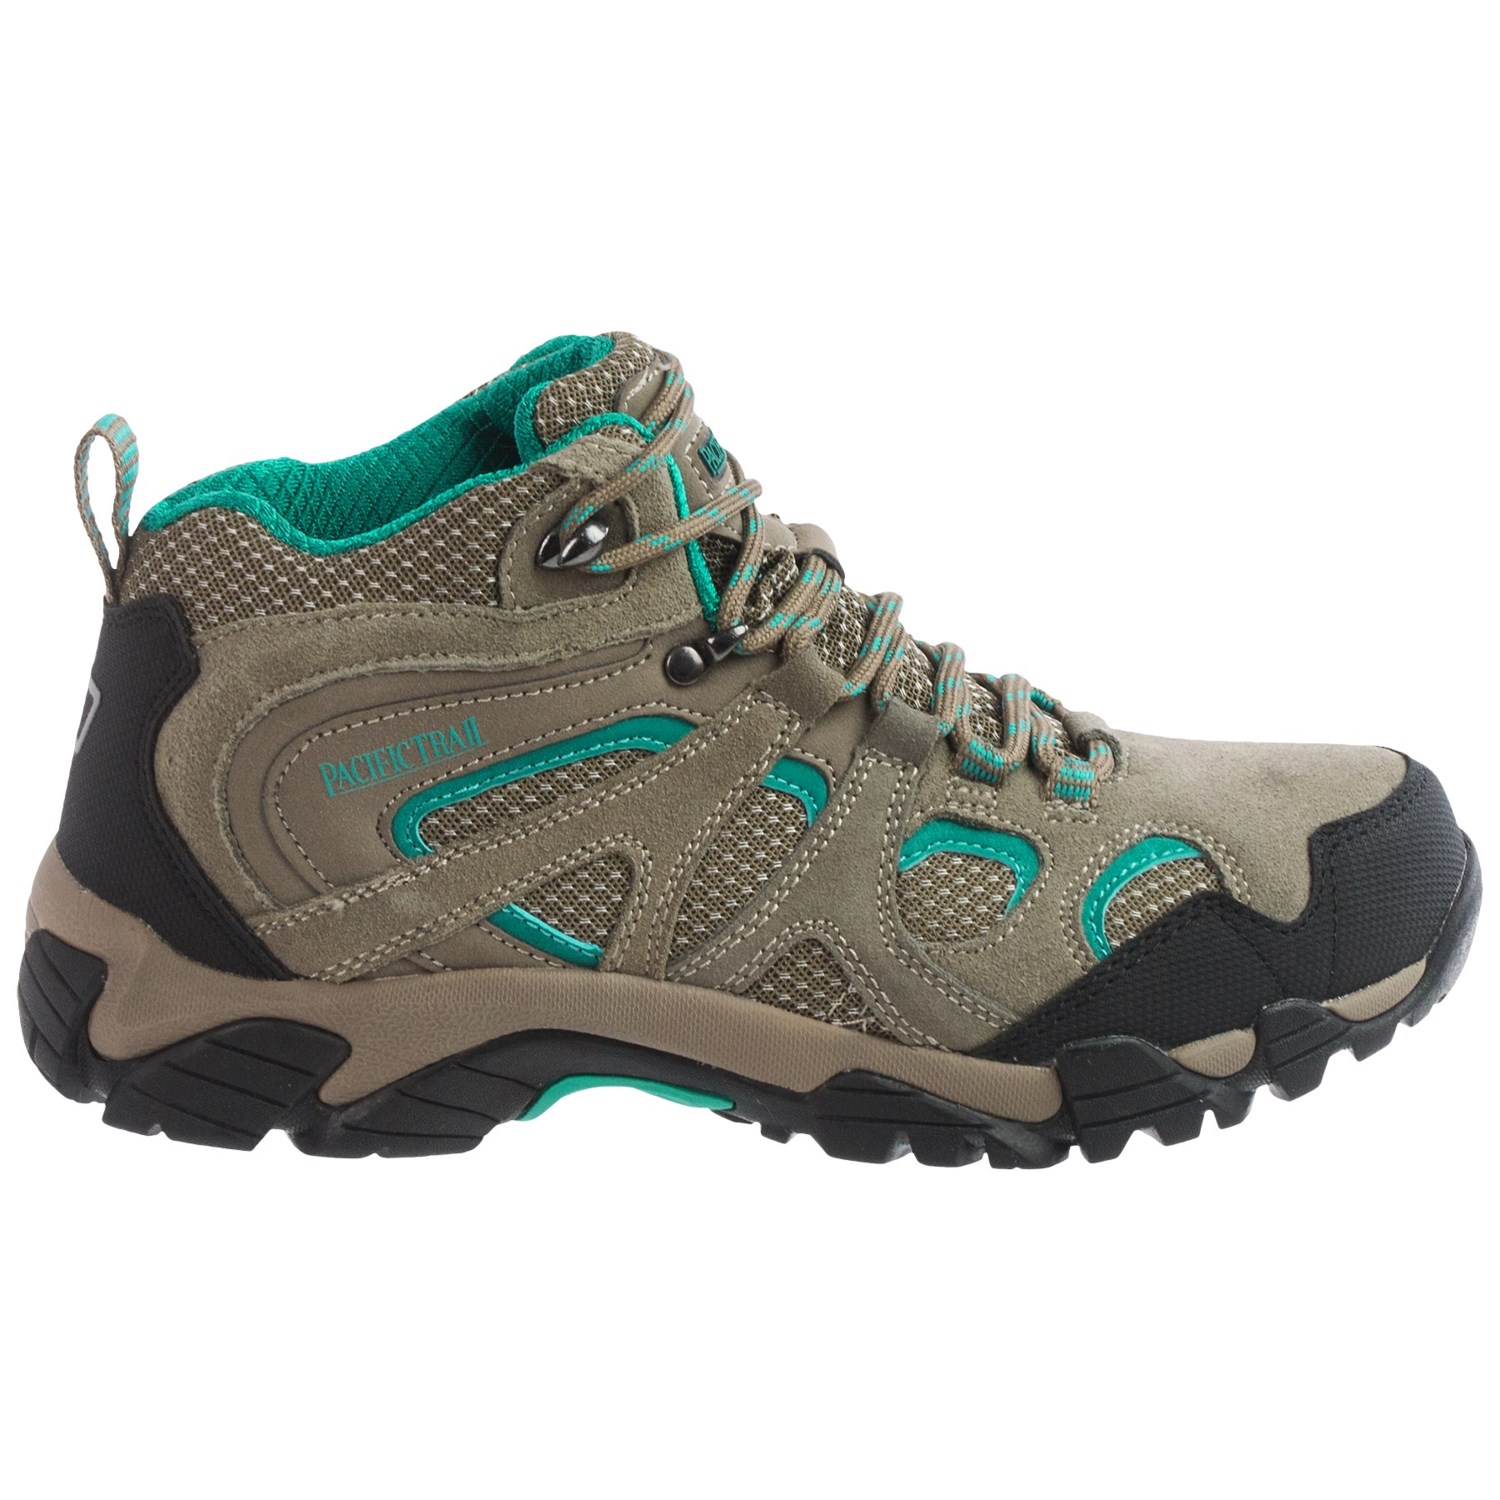 Pacific Trail Diller Hiking Boots (For Women) - Save 46%